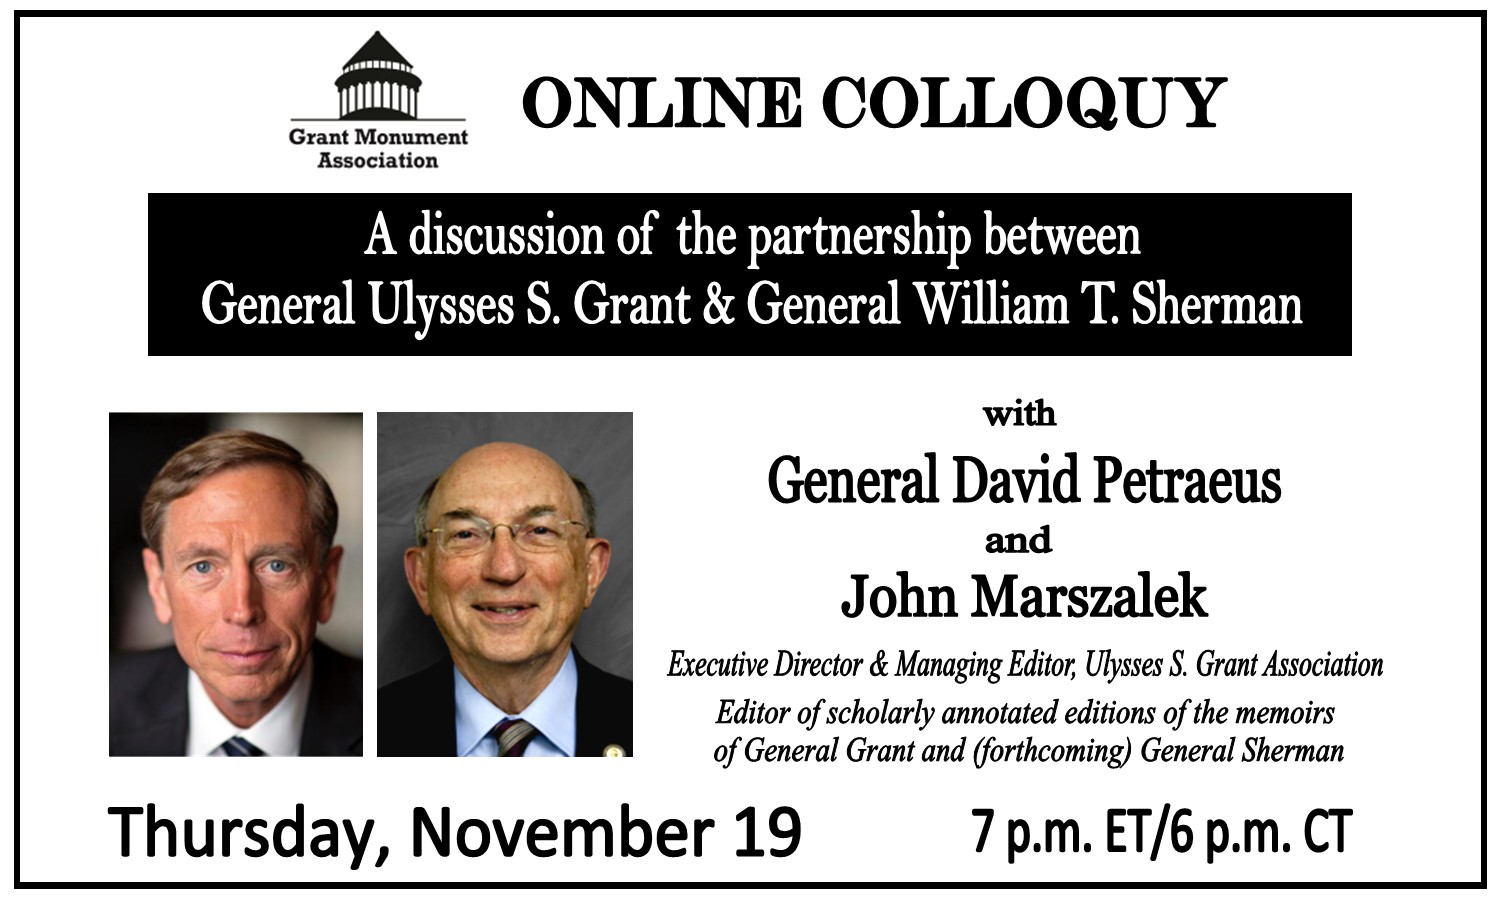 Announcement for online discussion with Gen. David Petraeus and Dr. John F. Marszalek